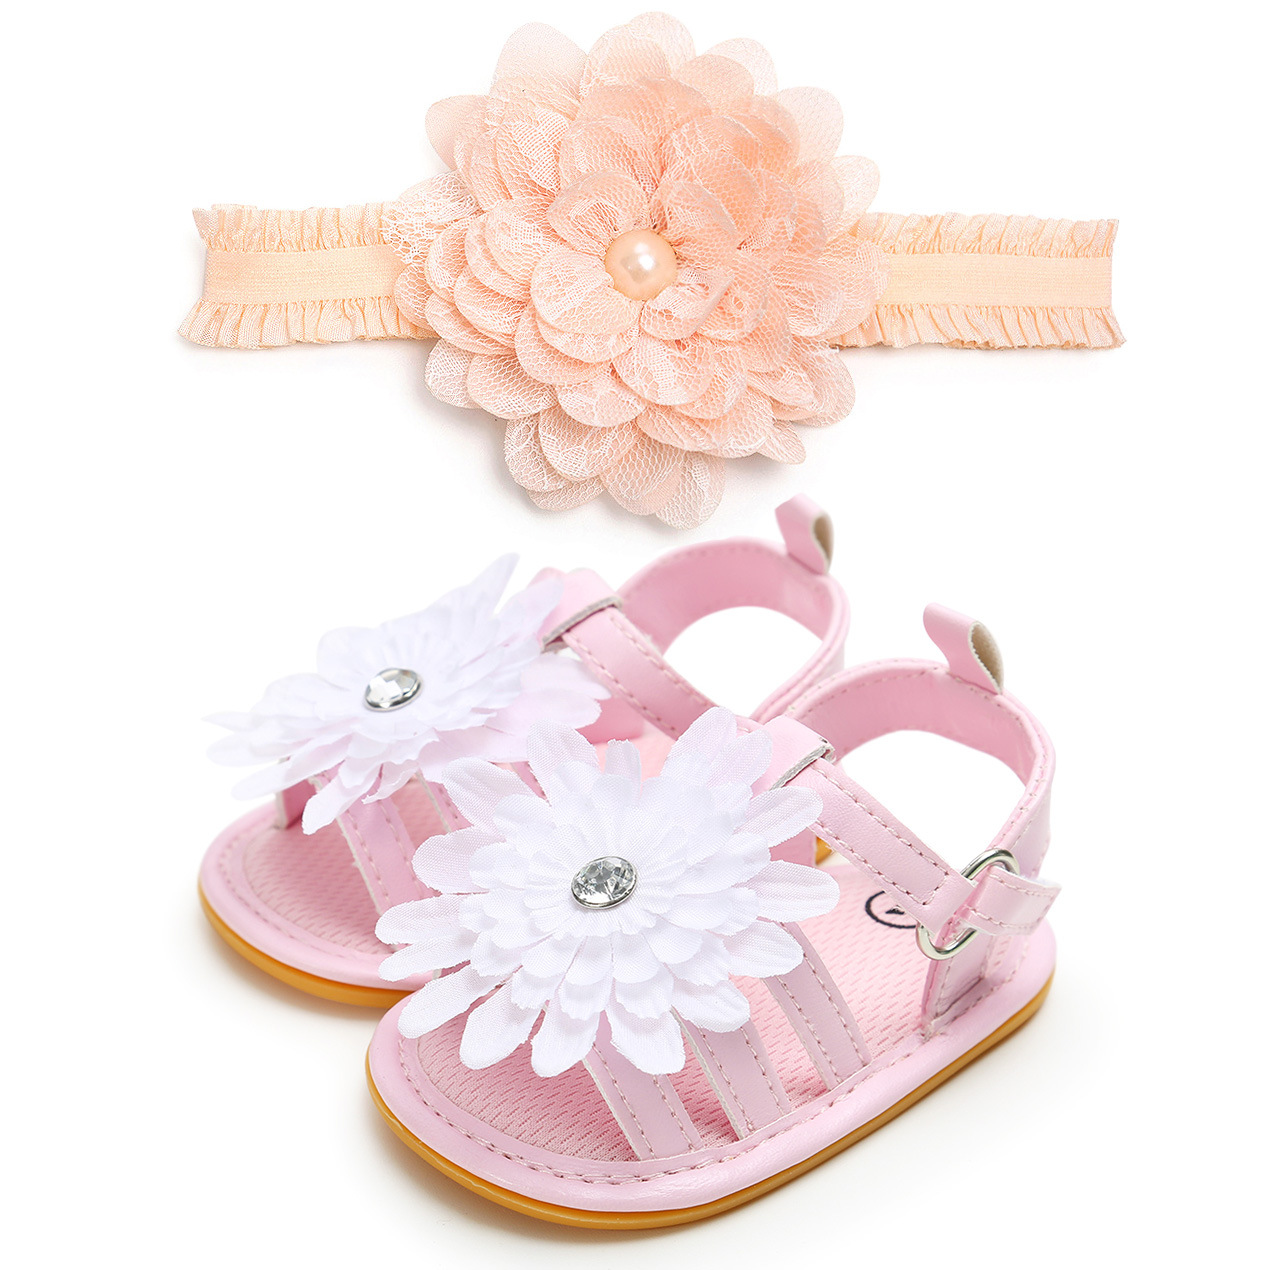 soft shoes for baby